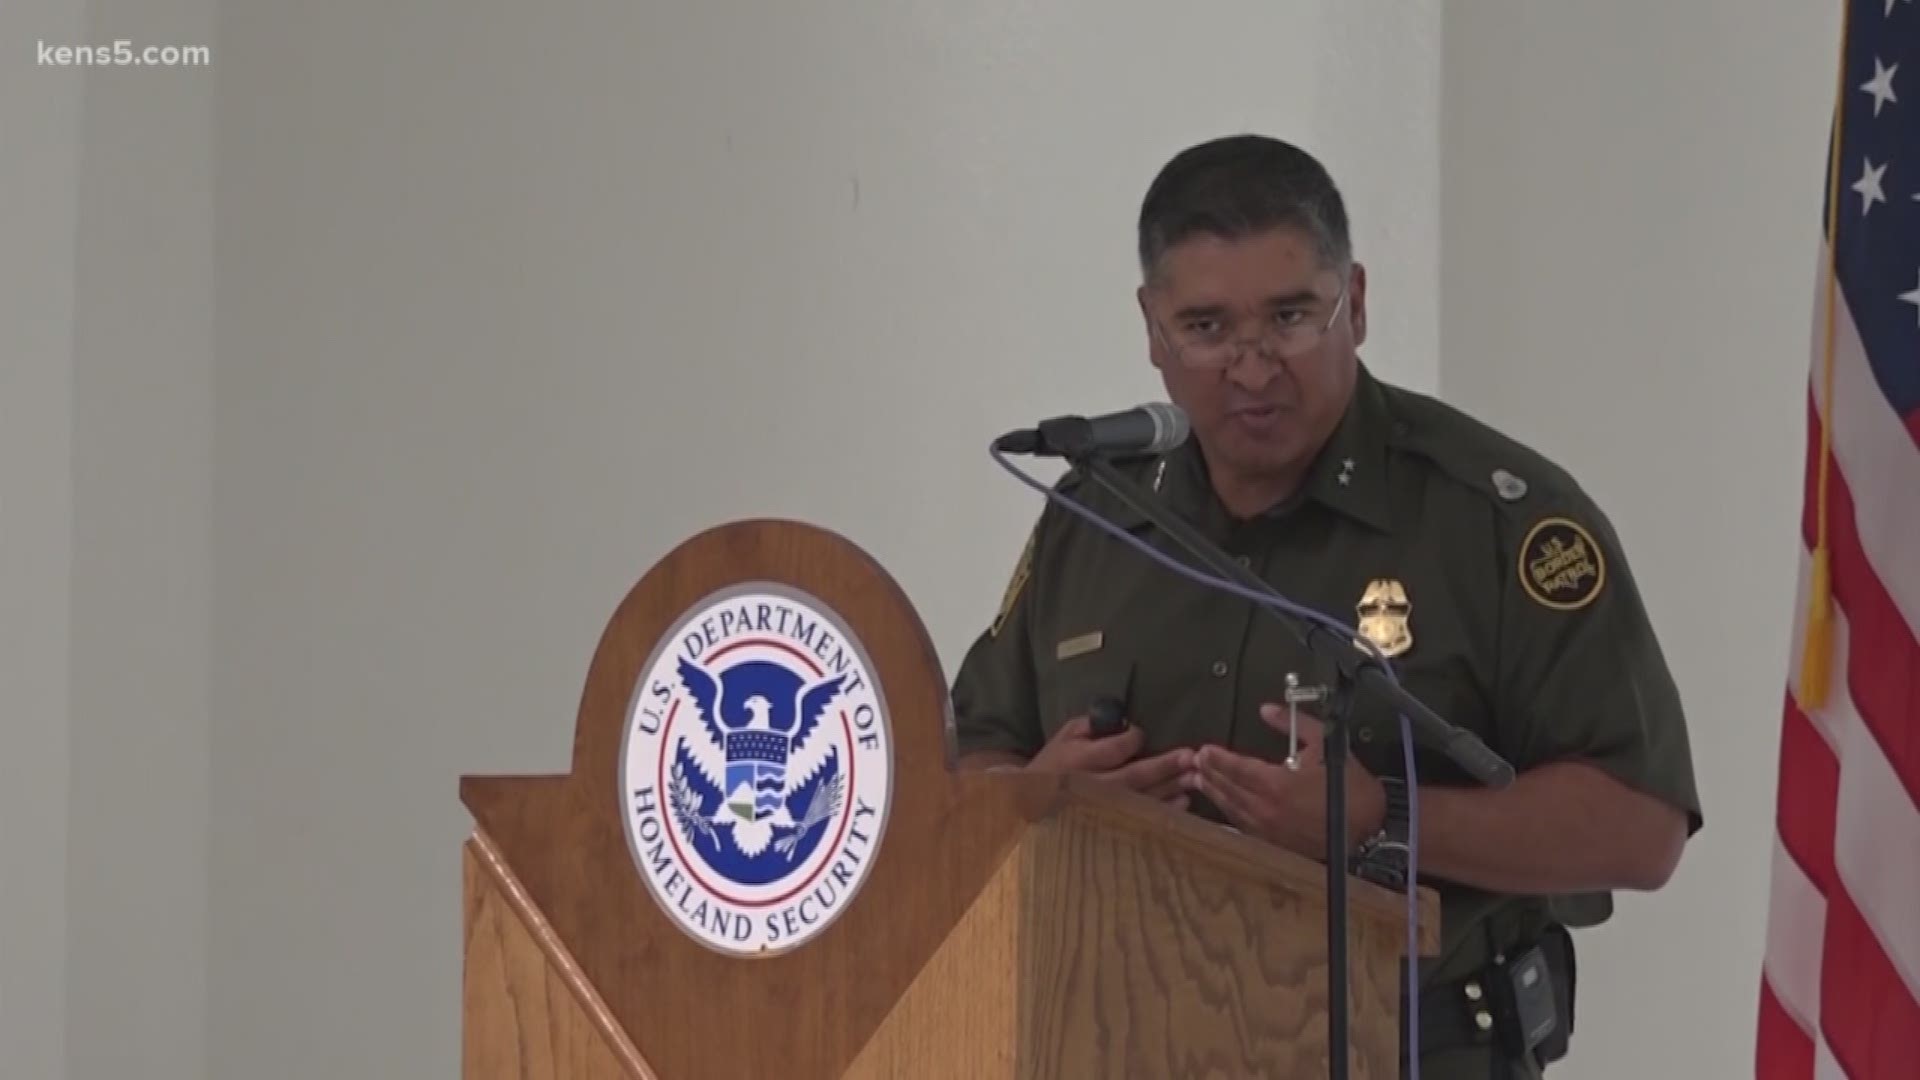 Officials say an increased number of migrants are being apprehended at the border, which leads to fewer agents patrolling the frontlines.